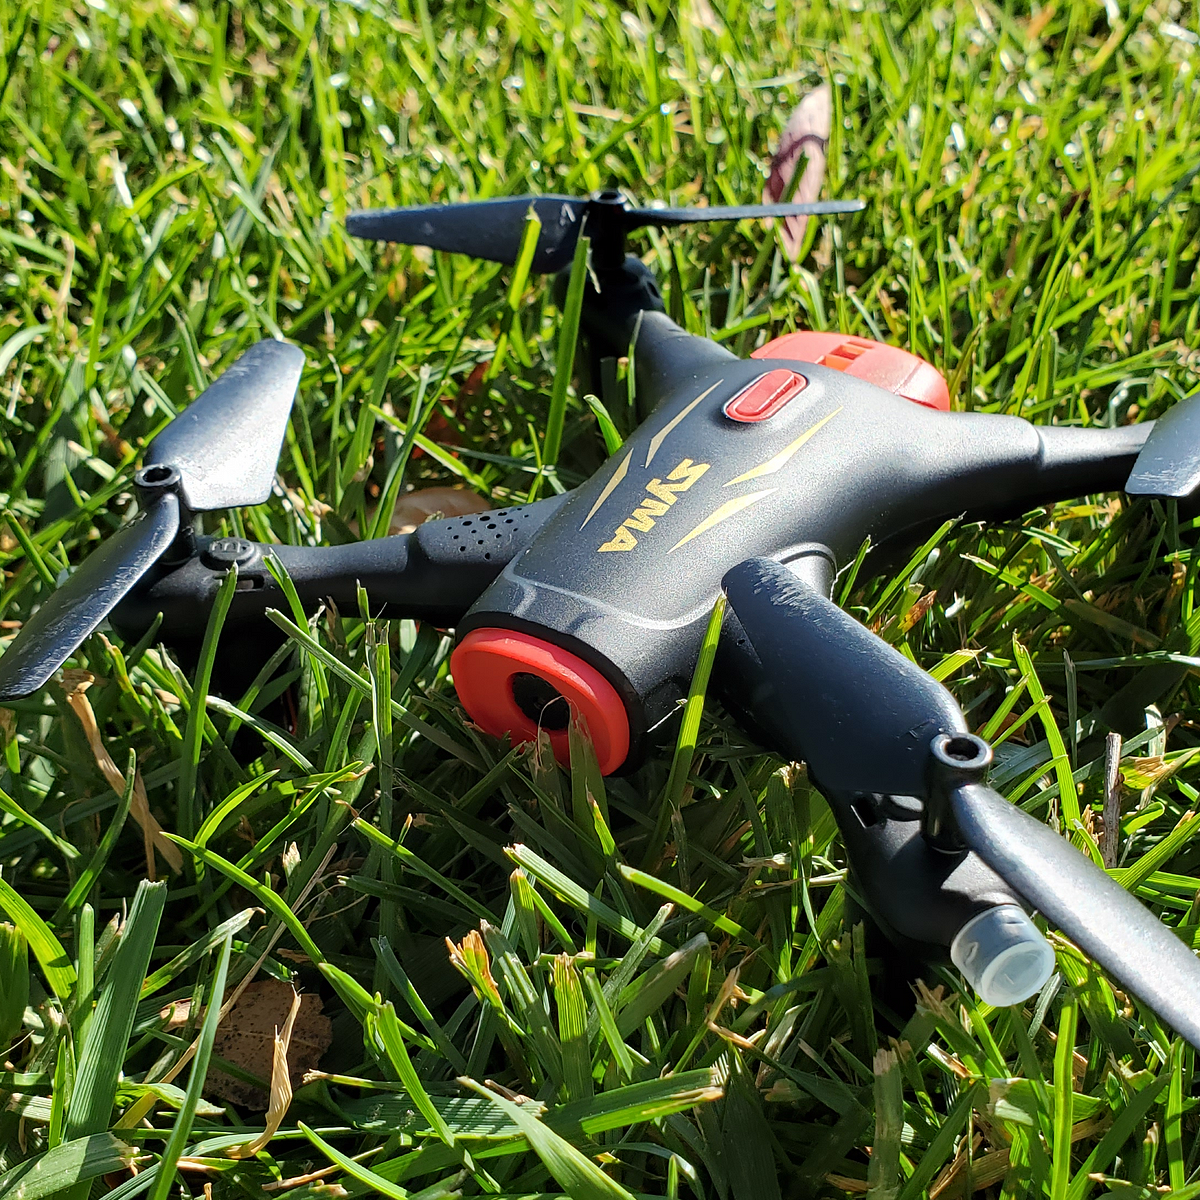 The Syma X400 Is a $55 Camera Drone That Fits in Your Palm | by Thomas  Smith | Debugger